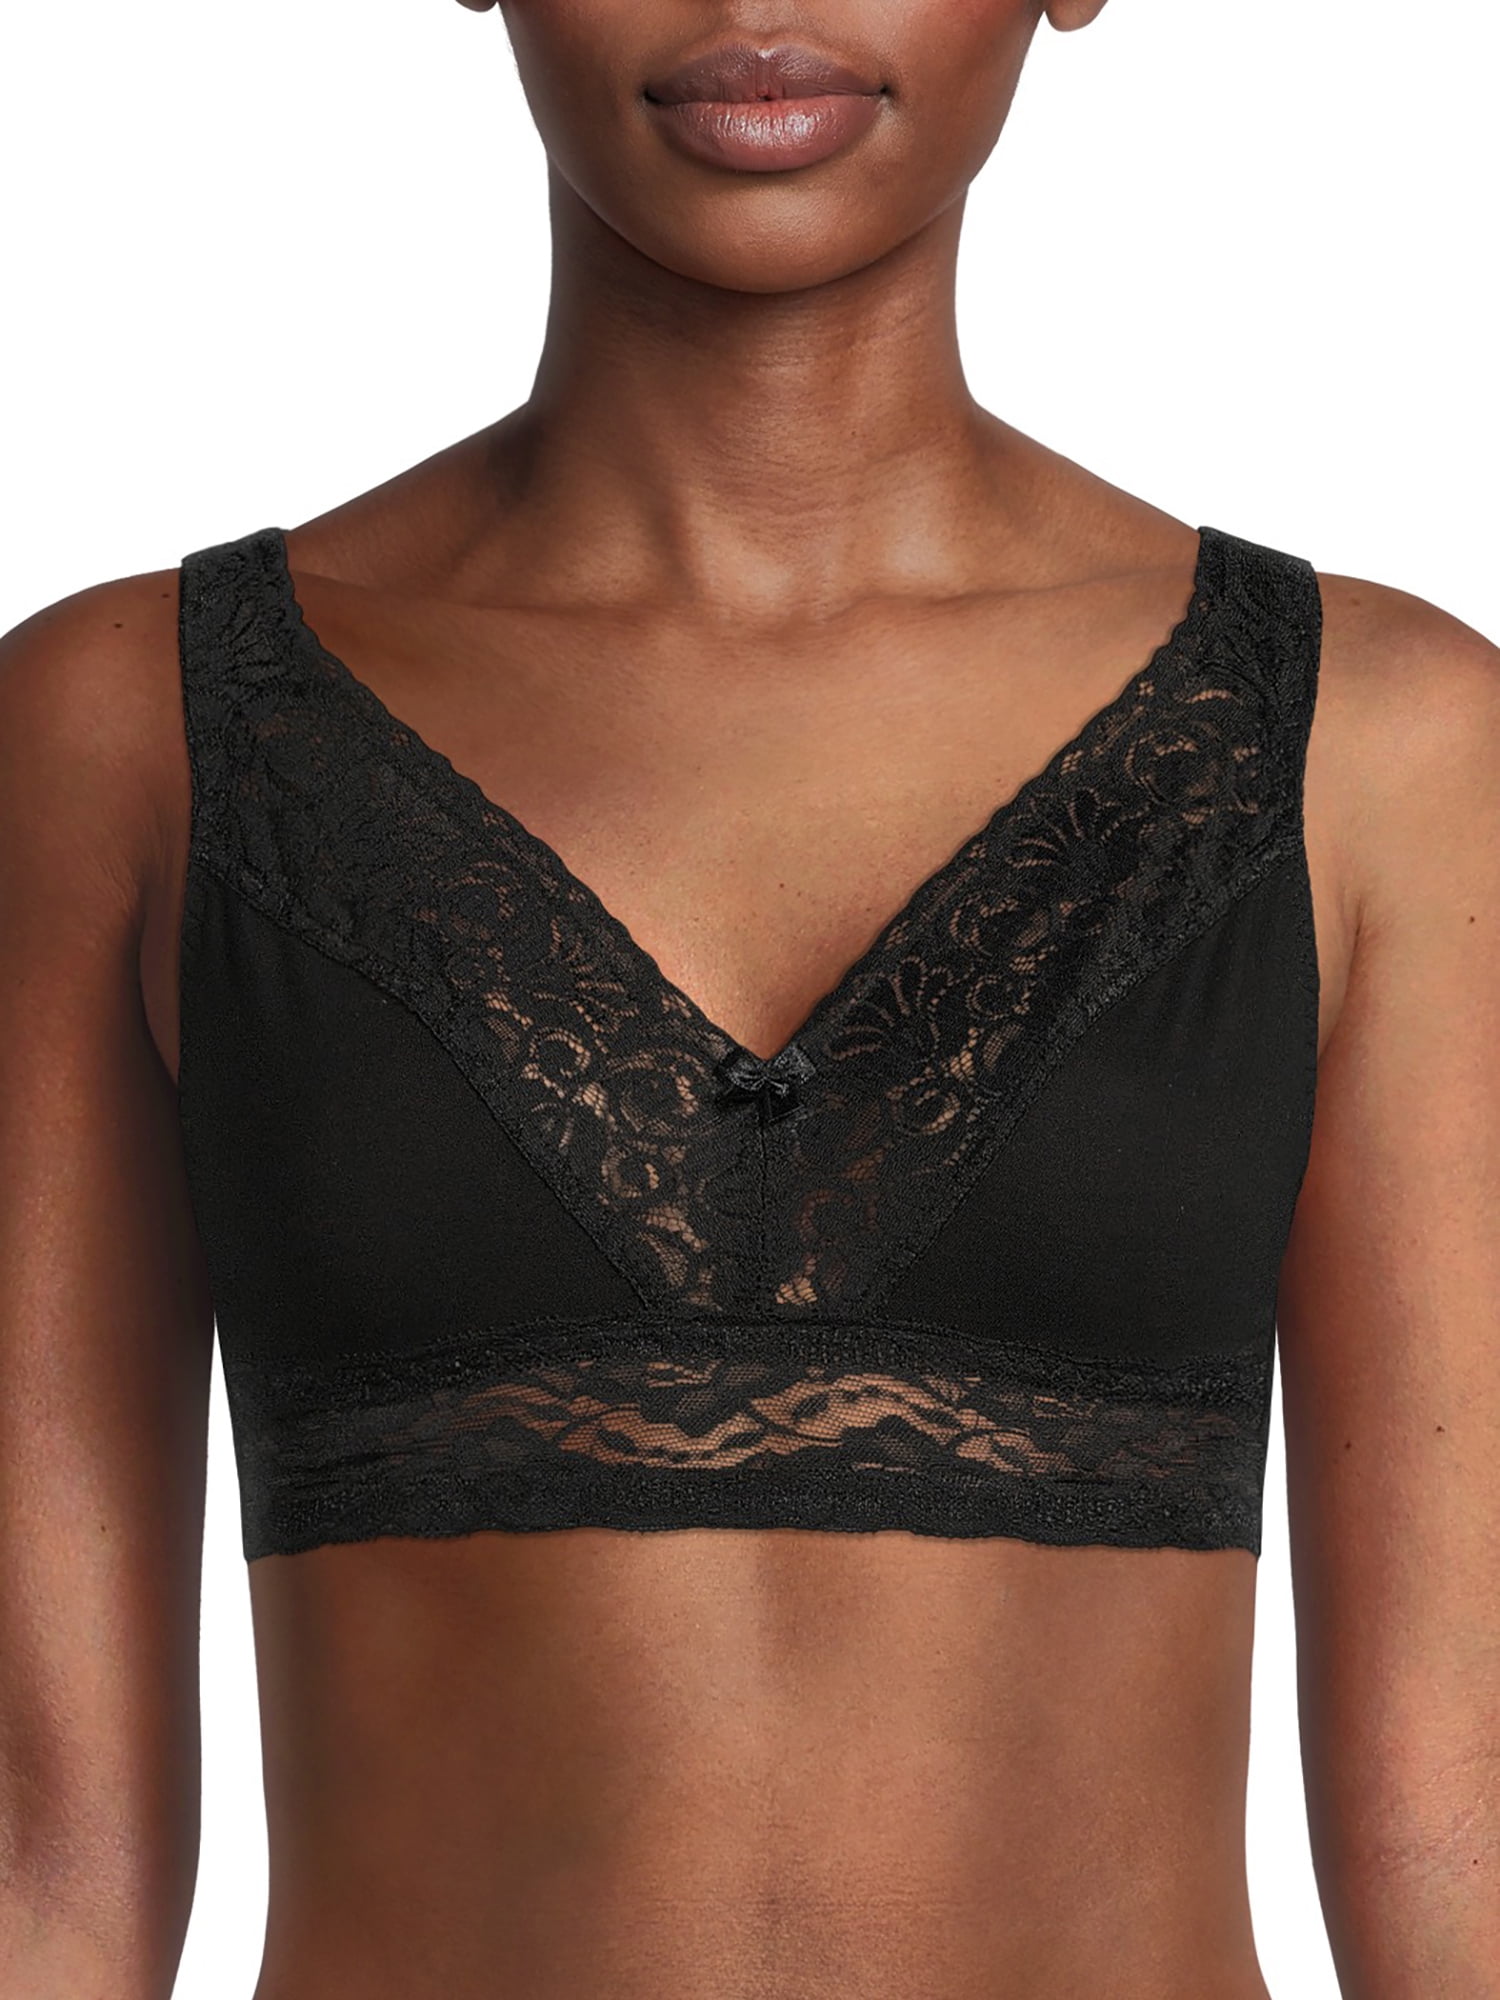 Wynette by Valmont Women's Back Hook Soft Cup Super Comfy Leisure Bra